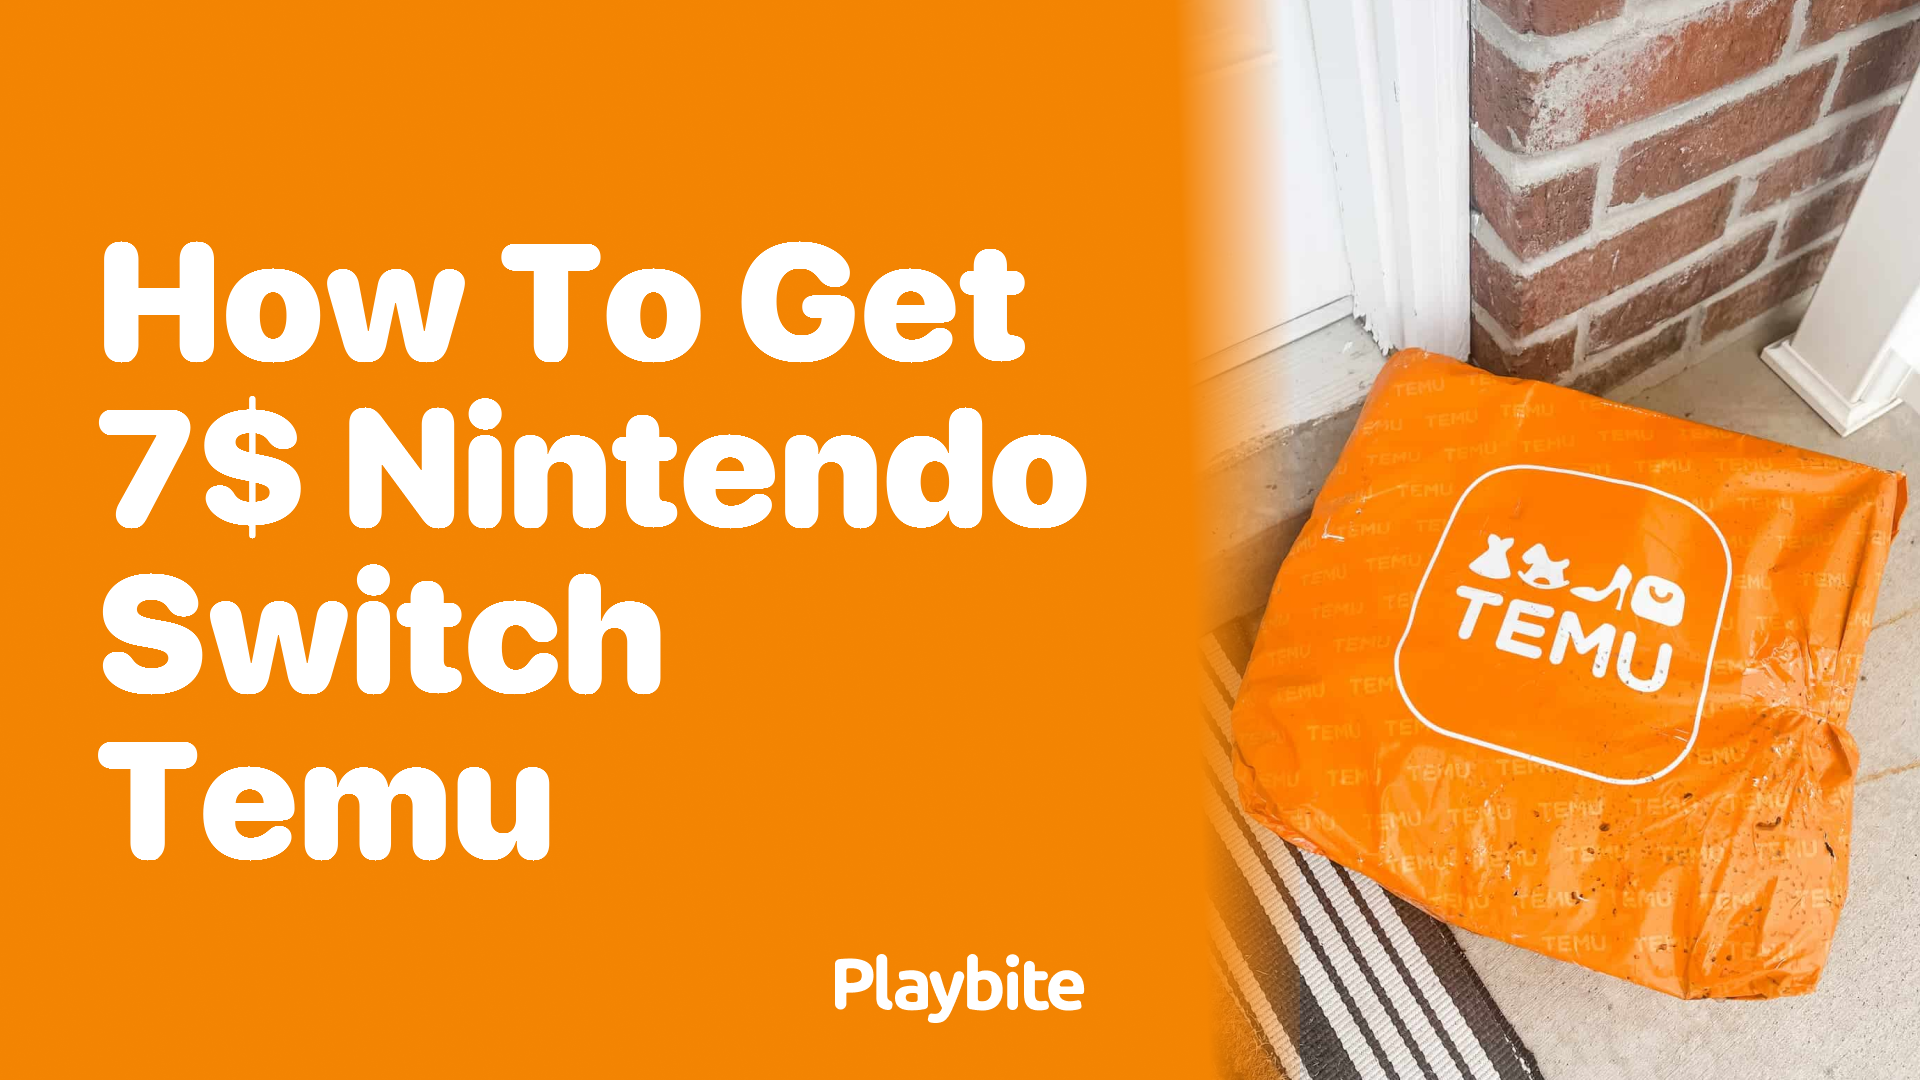 How to Get a $7 Nintendo Switch on Temu